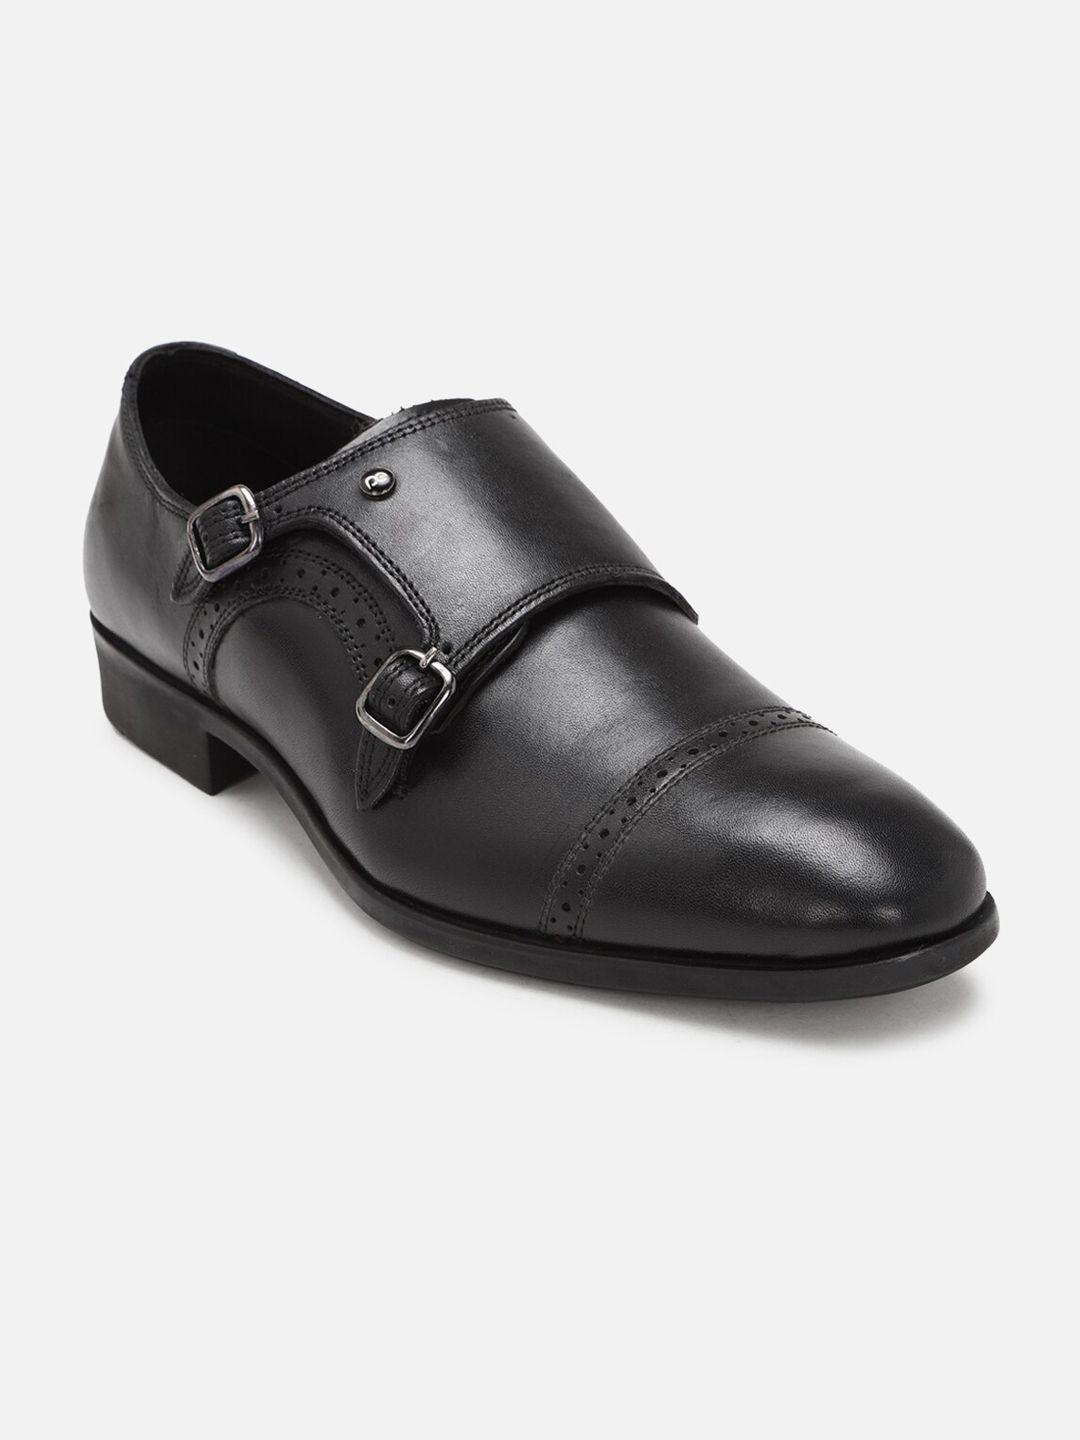 peter-england-men-perforated-leather-formal-monk-shoes